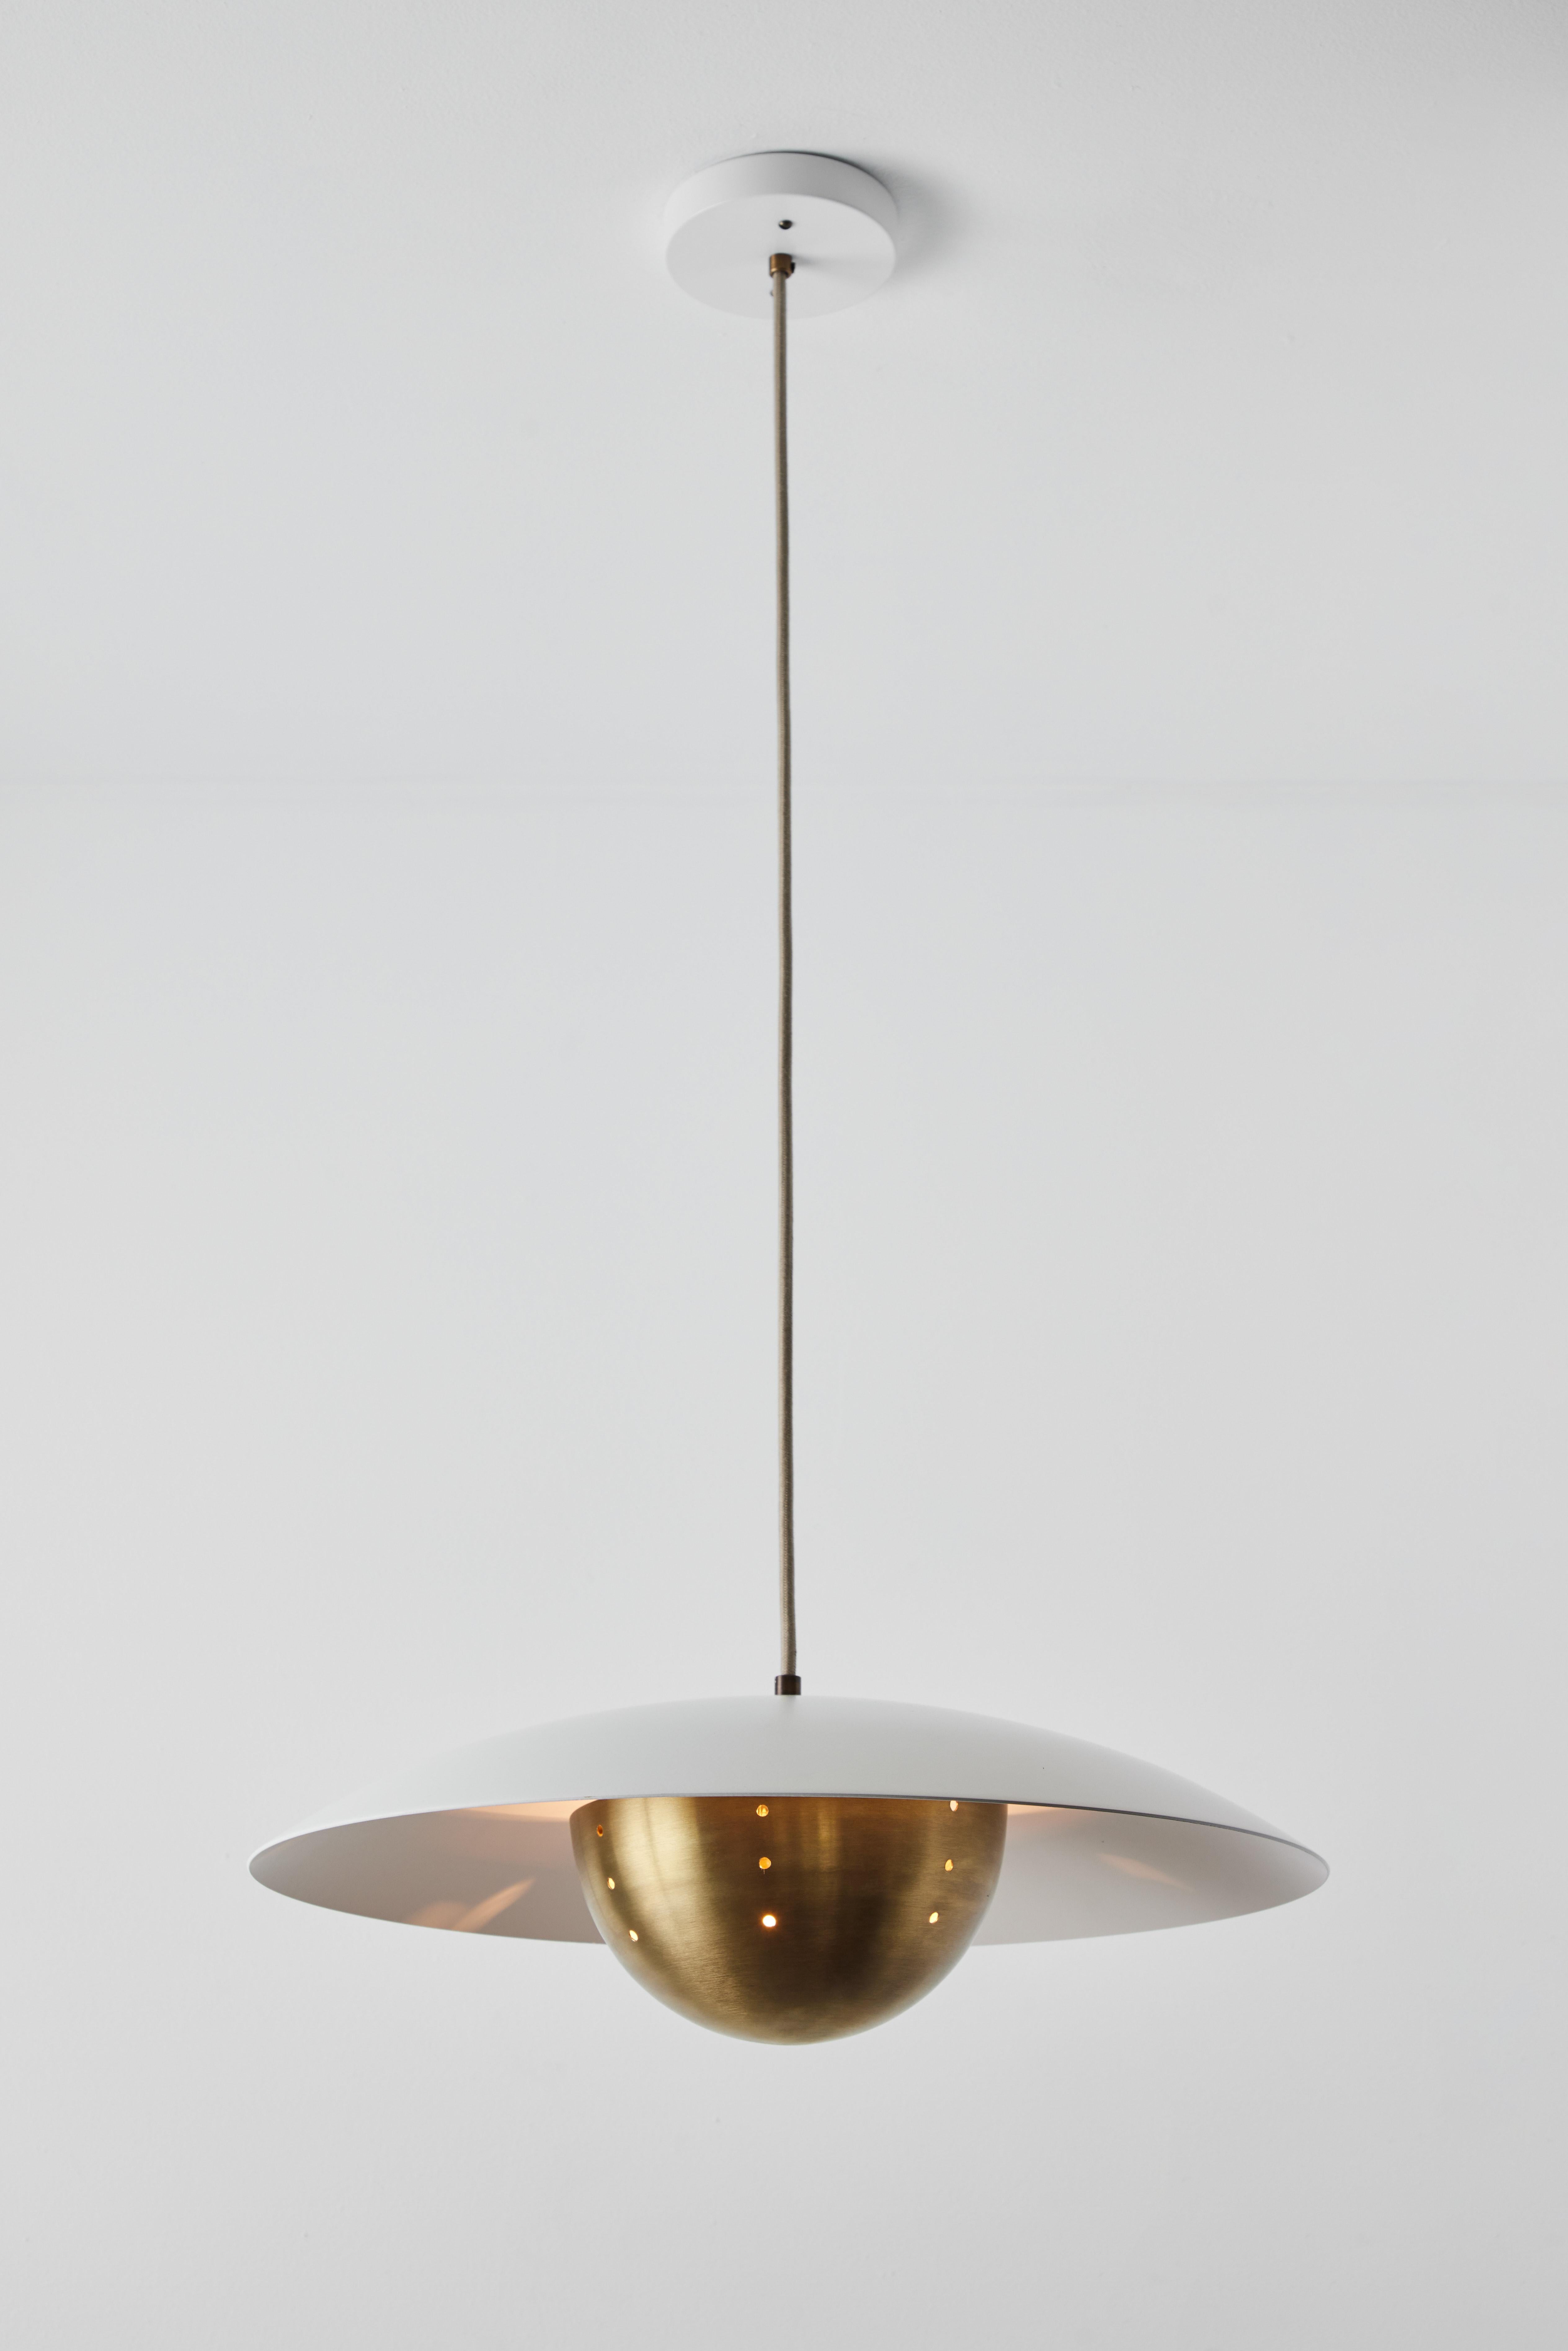 'Gabi' Perforated Brass Dome & White Painted Metal Pendant by Alvaro Benitez For Sale 1